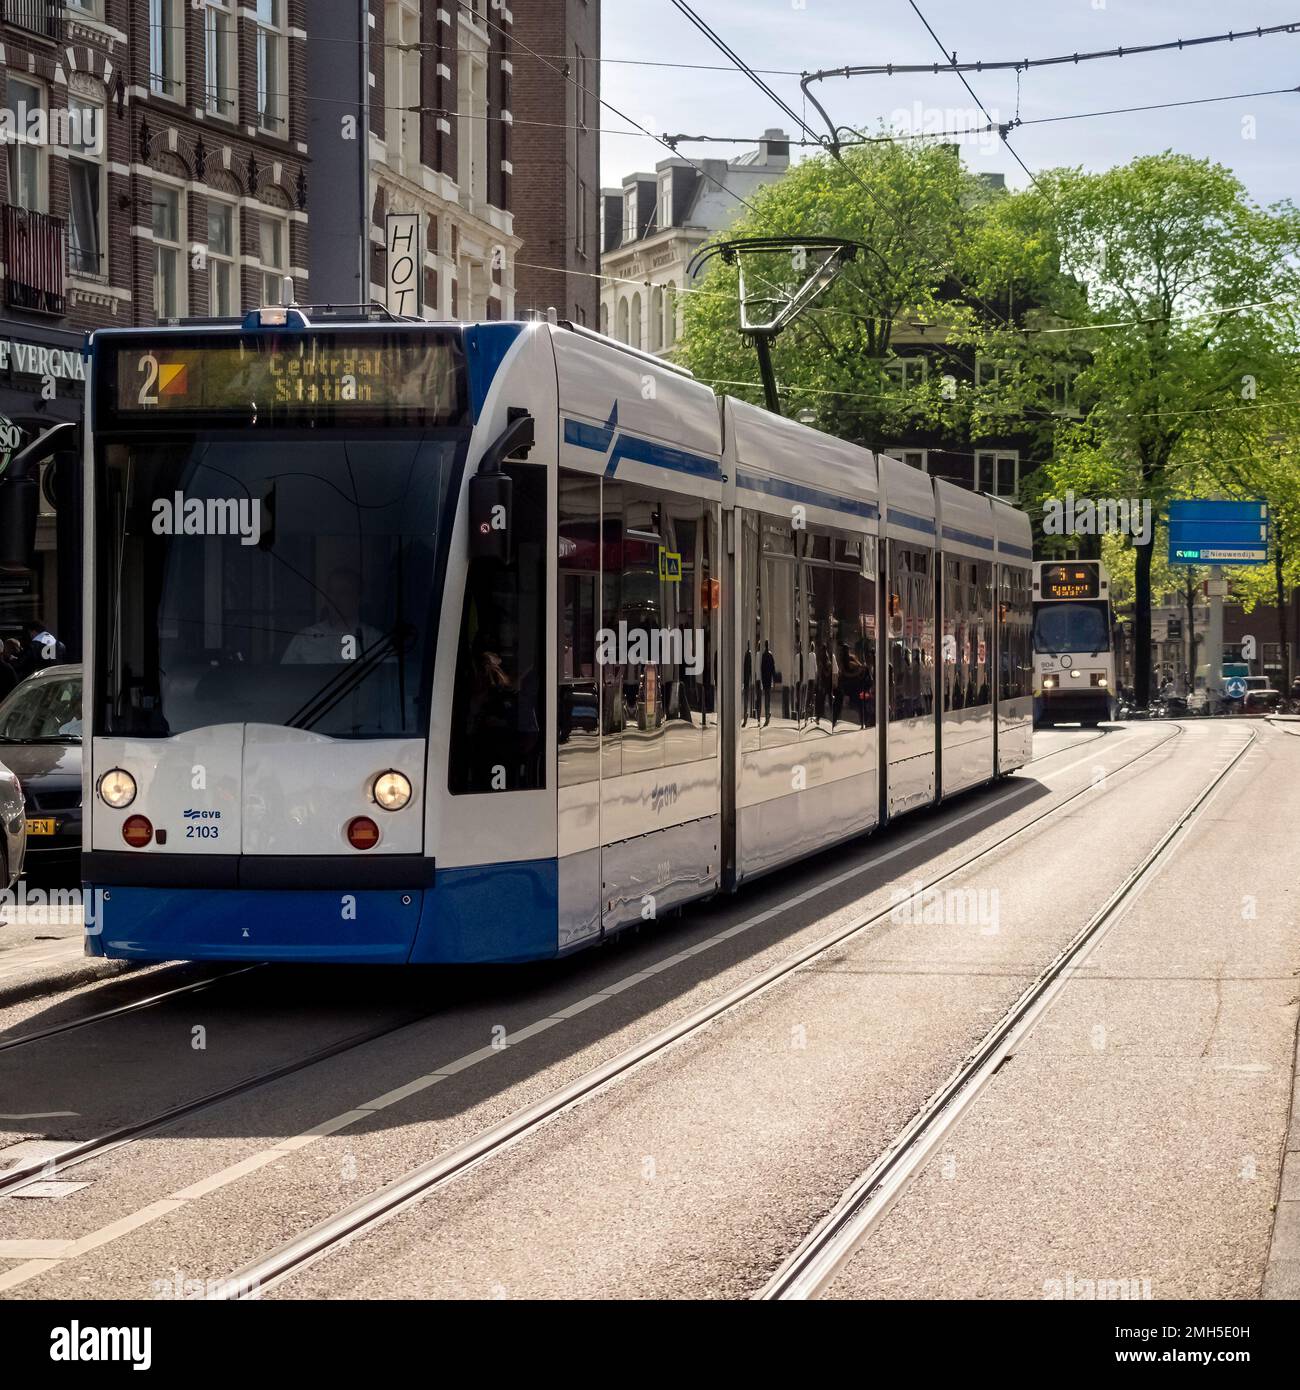 OAMSTERDAM, NETHERLANDS - MAY 01, 2018:  GVB tram on route 2 in the City Centre Stock Photo